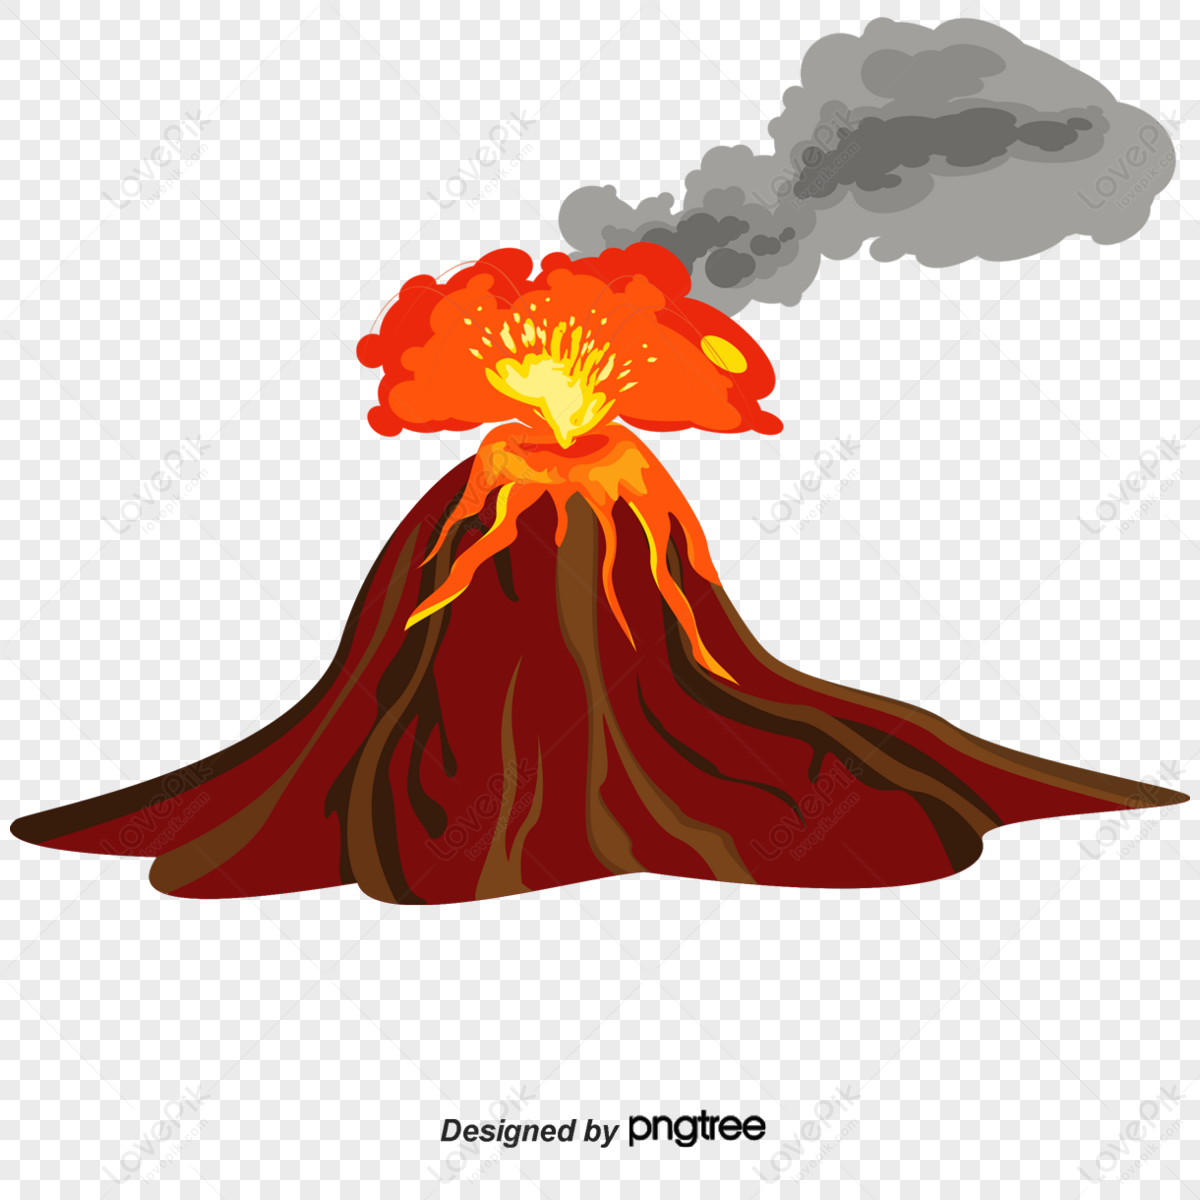 active volcanic lava eruption,activity,volcanic rock,crater png image